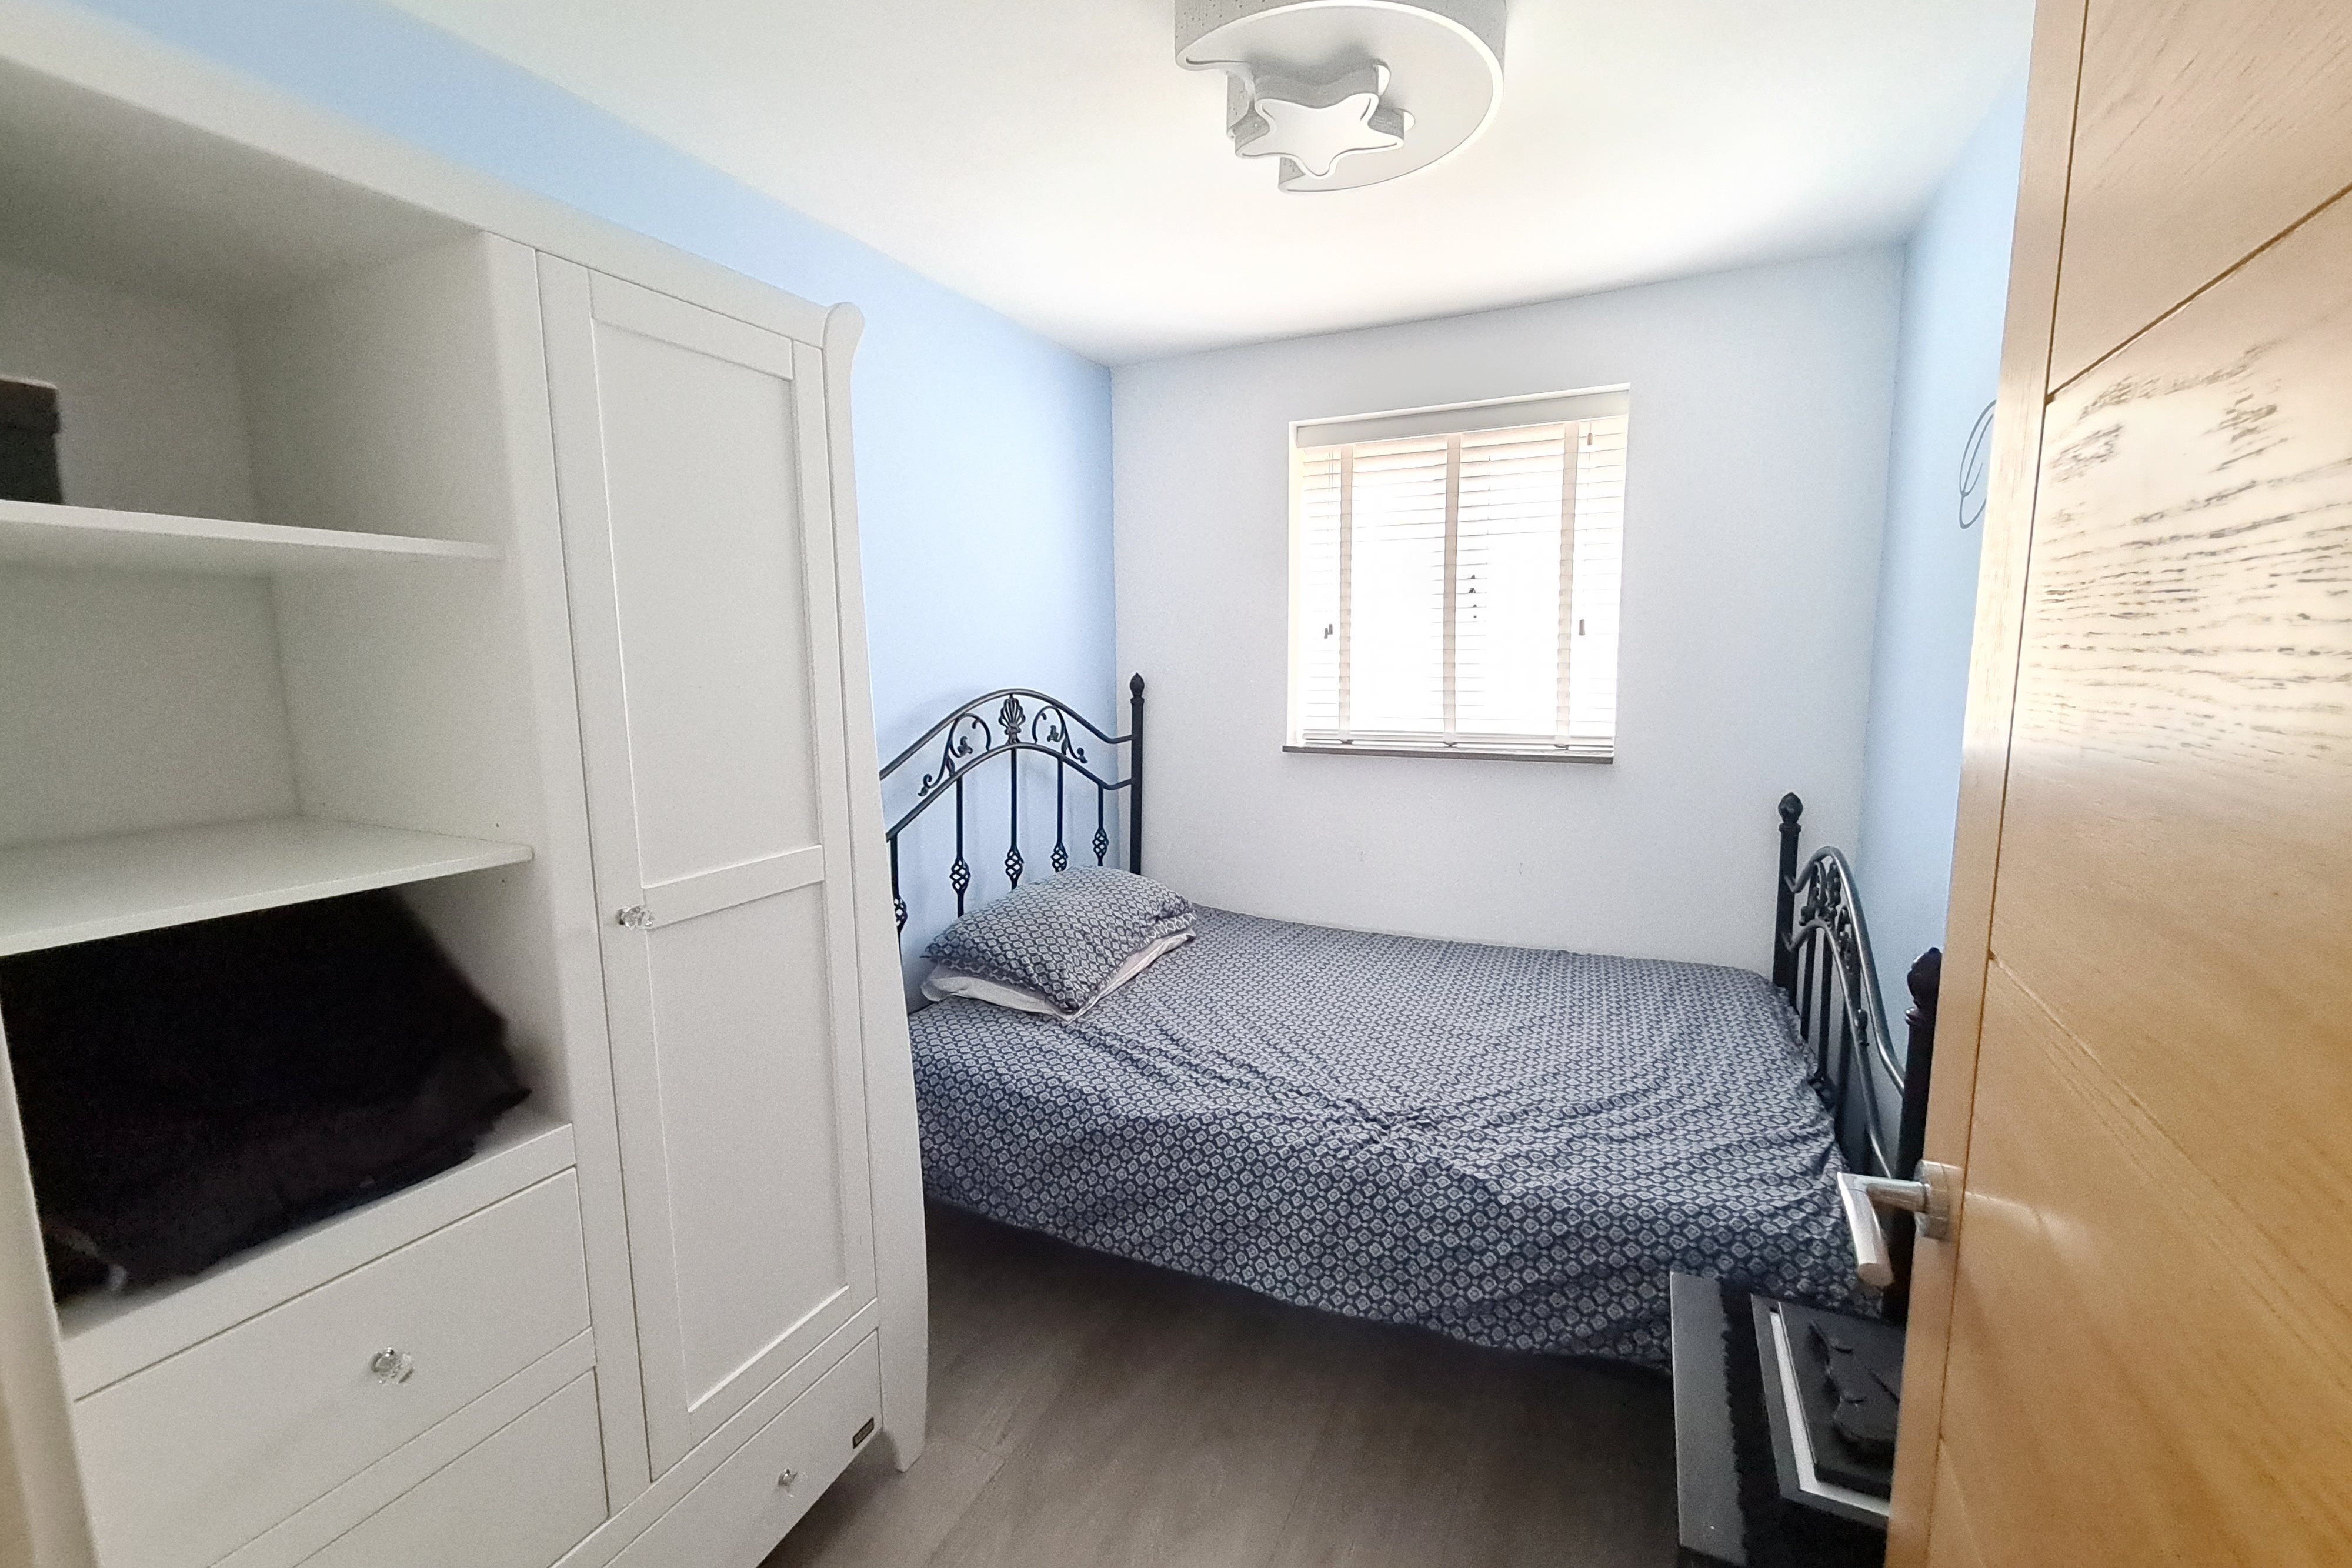 1 bed house / flat share to rent in The Chase (Bedroom 3), Rayleigh - Property Image 1